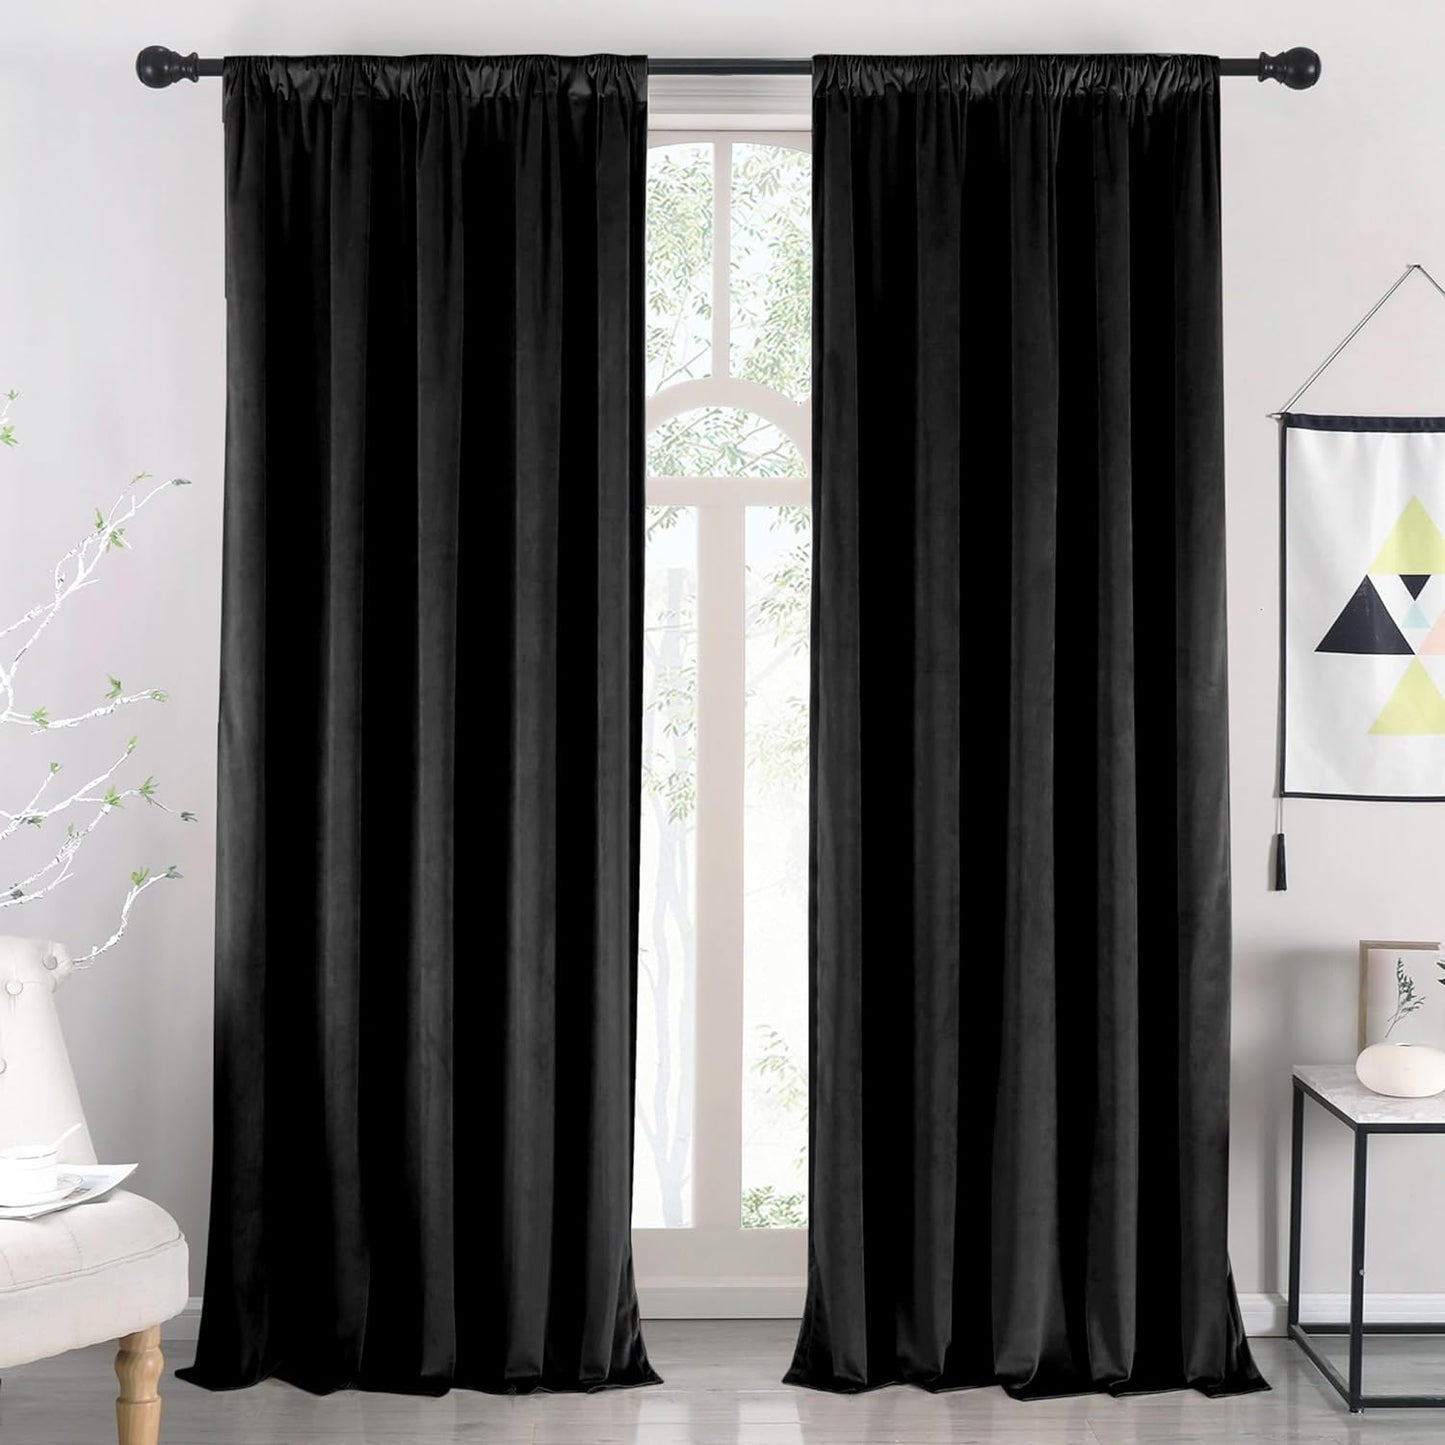 Nanbowang Green Velvet Curtains 63 Inches Long Dark Green Light Blocking Rod Pocket Window Curtain Panels Set of 2 Heat Insulated Curtains Thermal Curtain Panels for Bedroom  nanbowang Black 52"X90" 